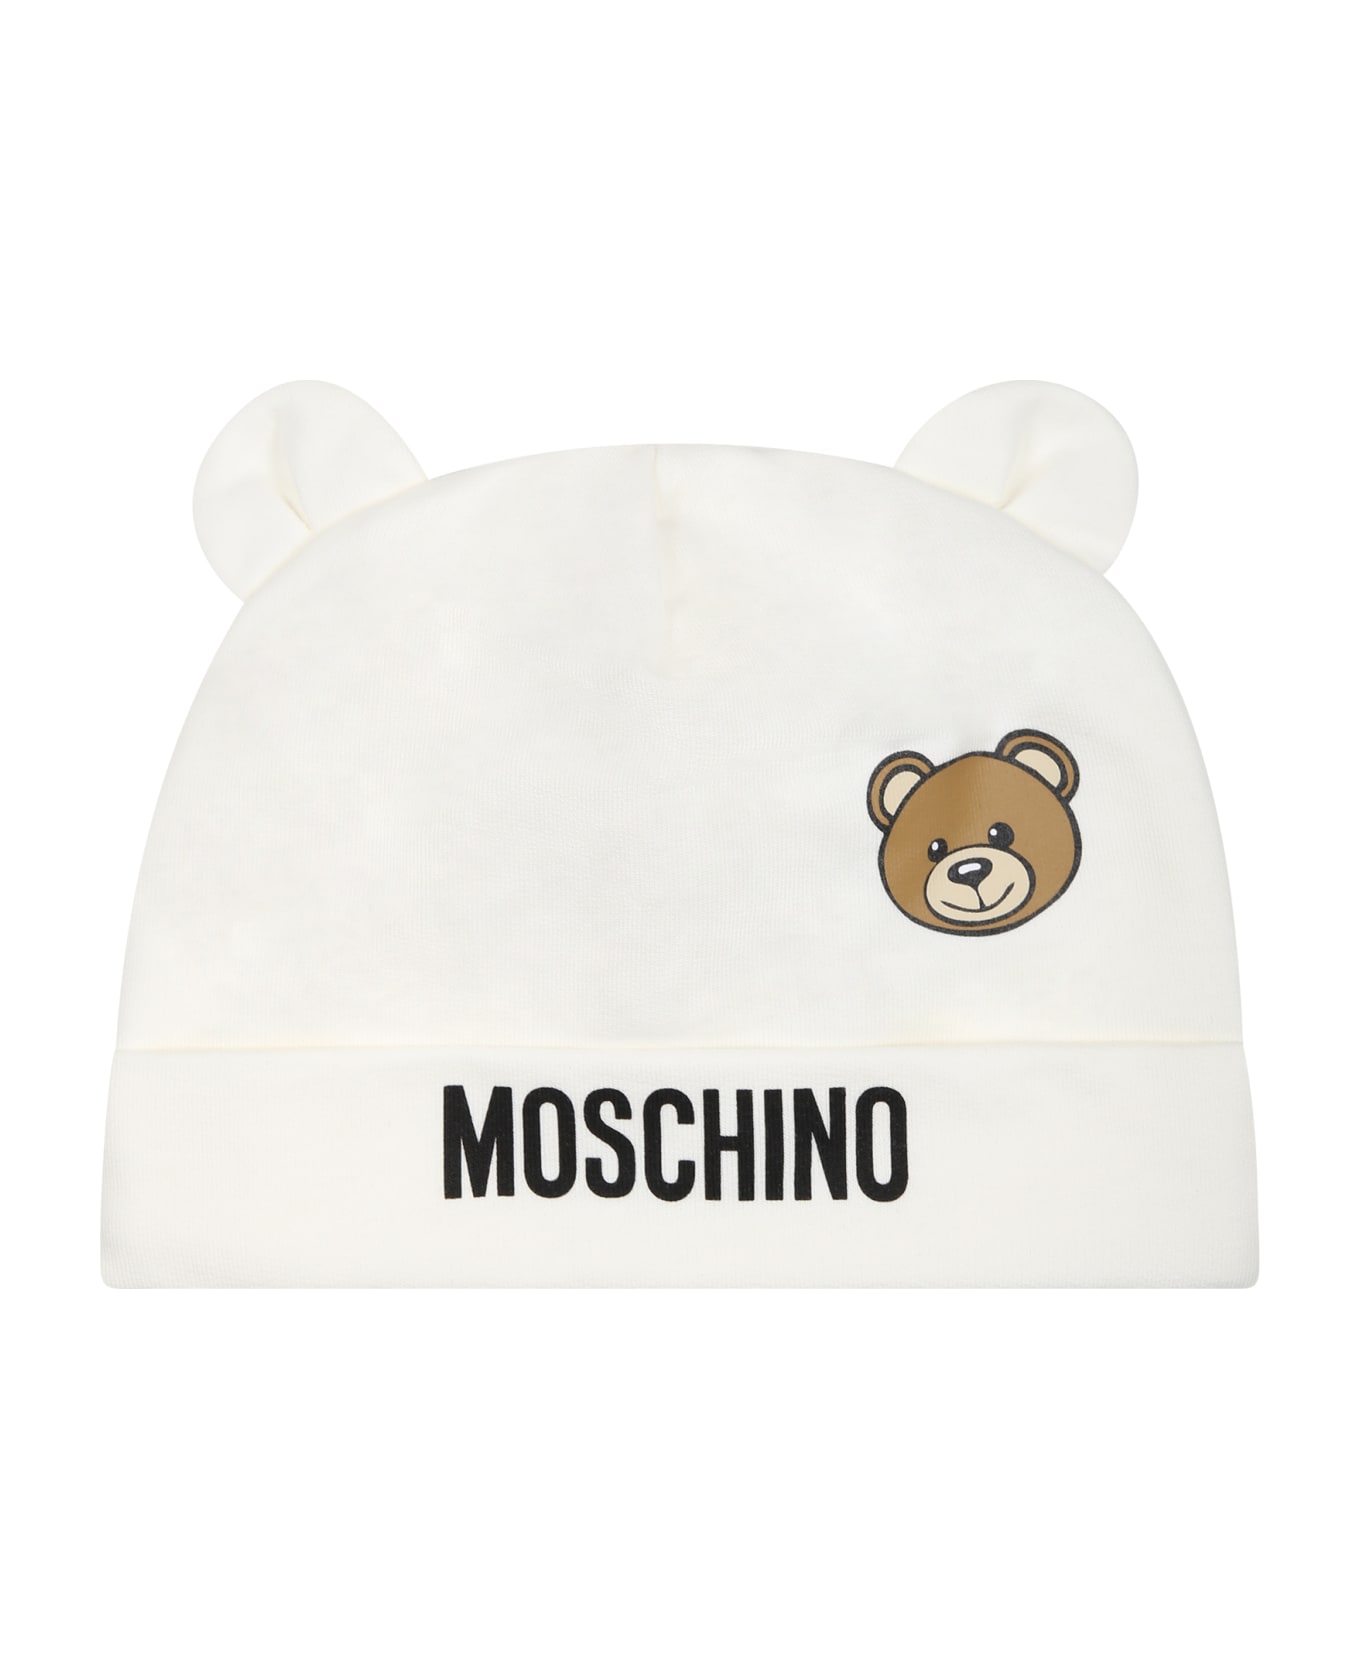 Moschino White Set For Baby Kids With Teddy Bear - White アクセサリー＆ギフト